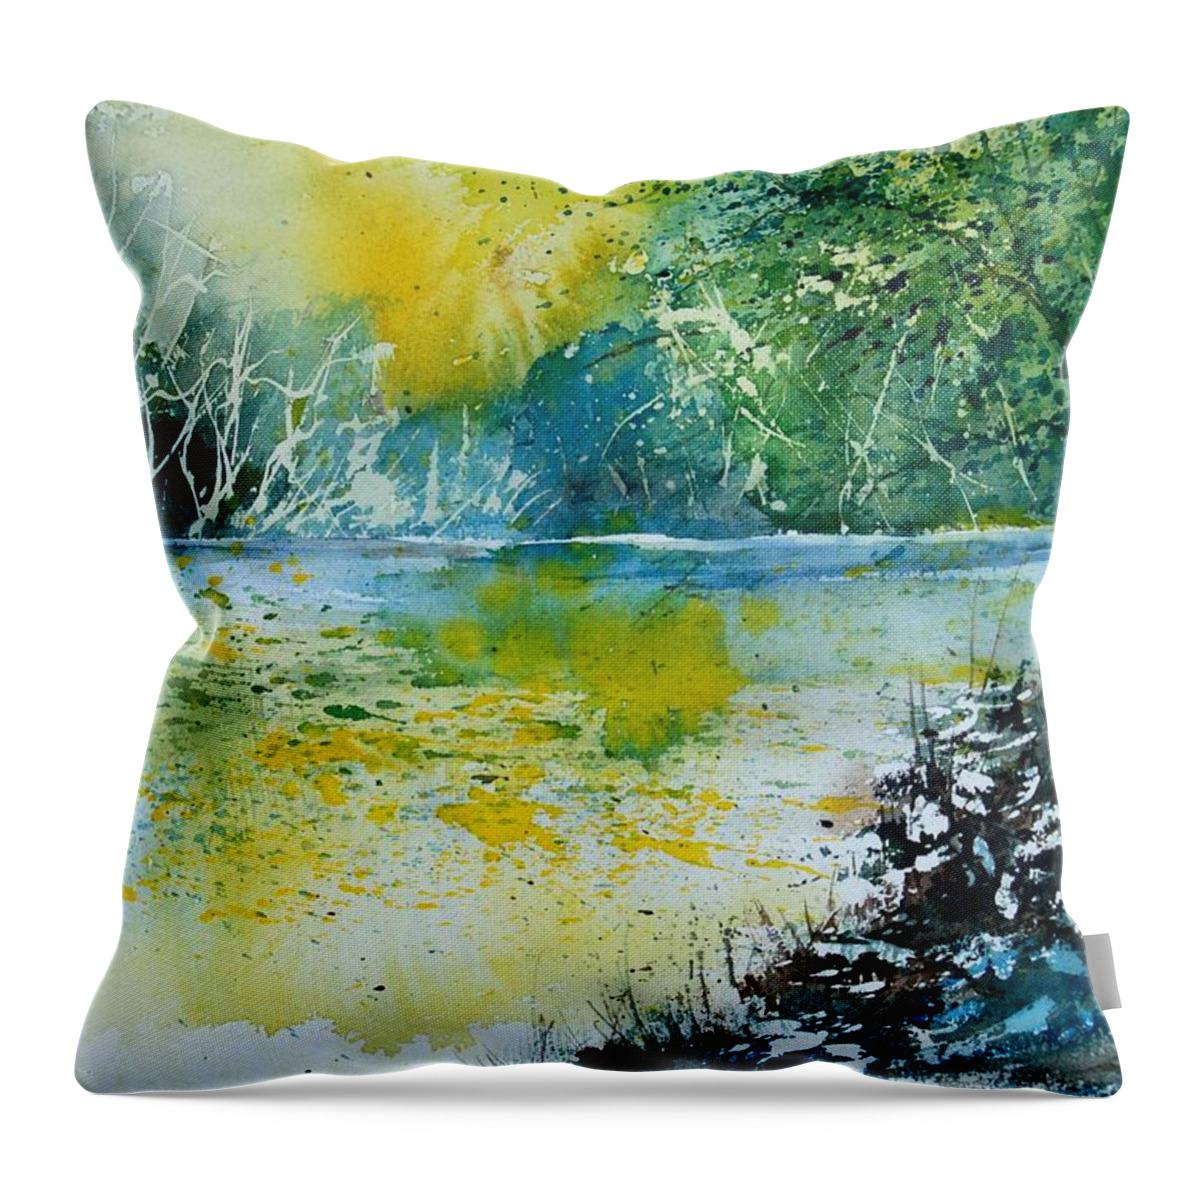 Pond Throw Pillow featuring the painting Watercolor 051108 by Pol Ledent